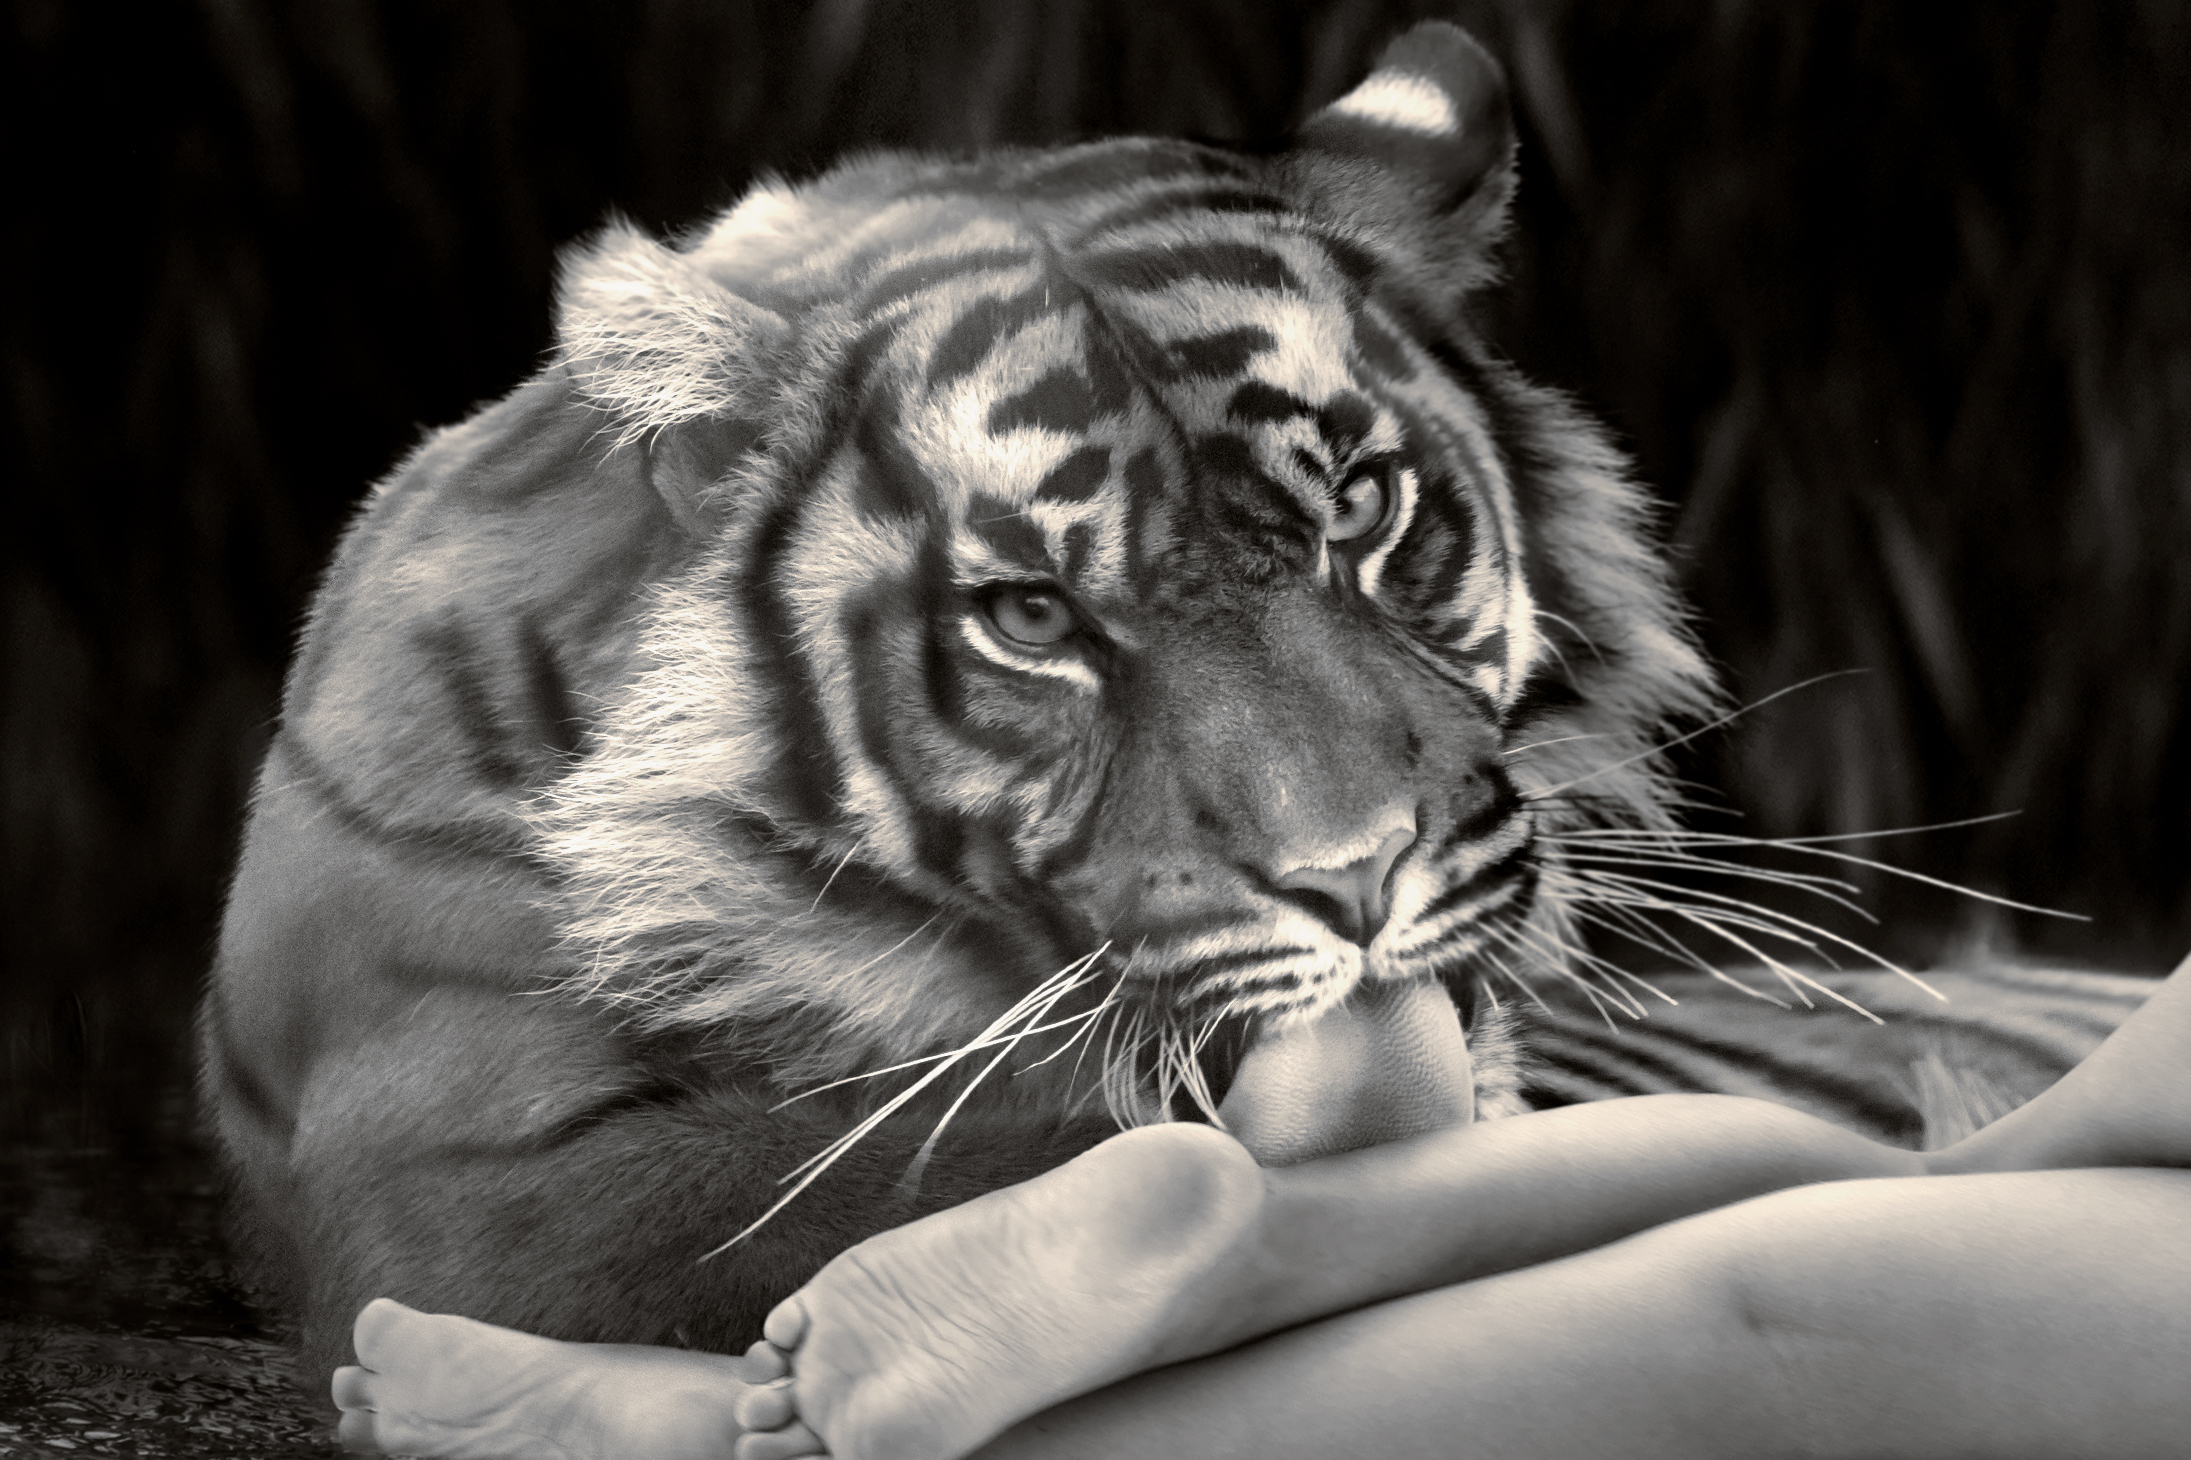 tiger licking and grooming a woman's leg